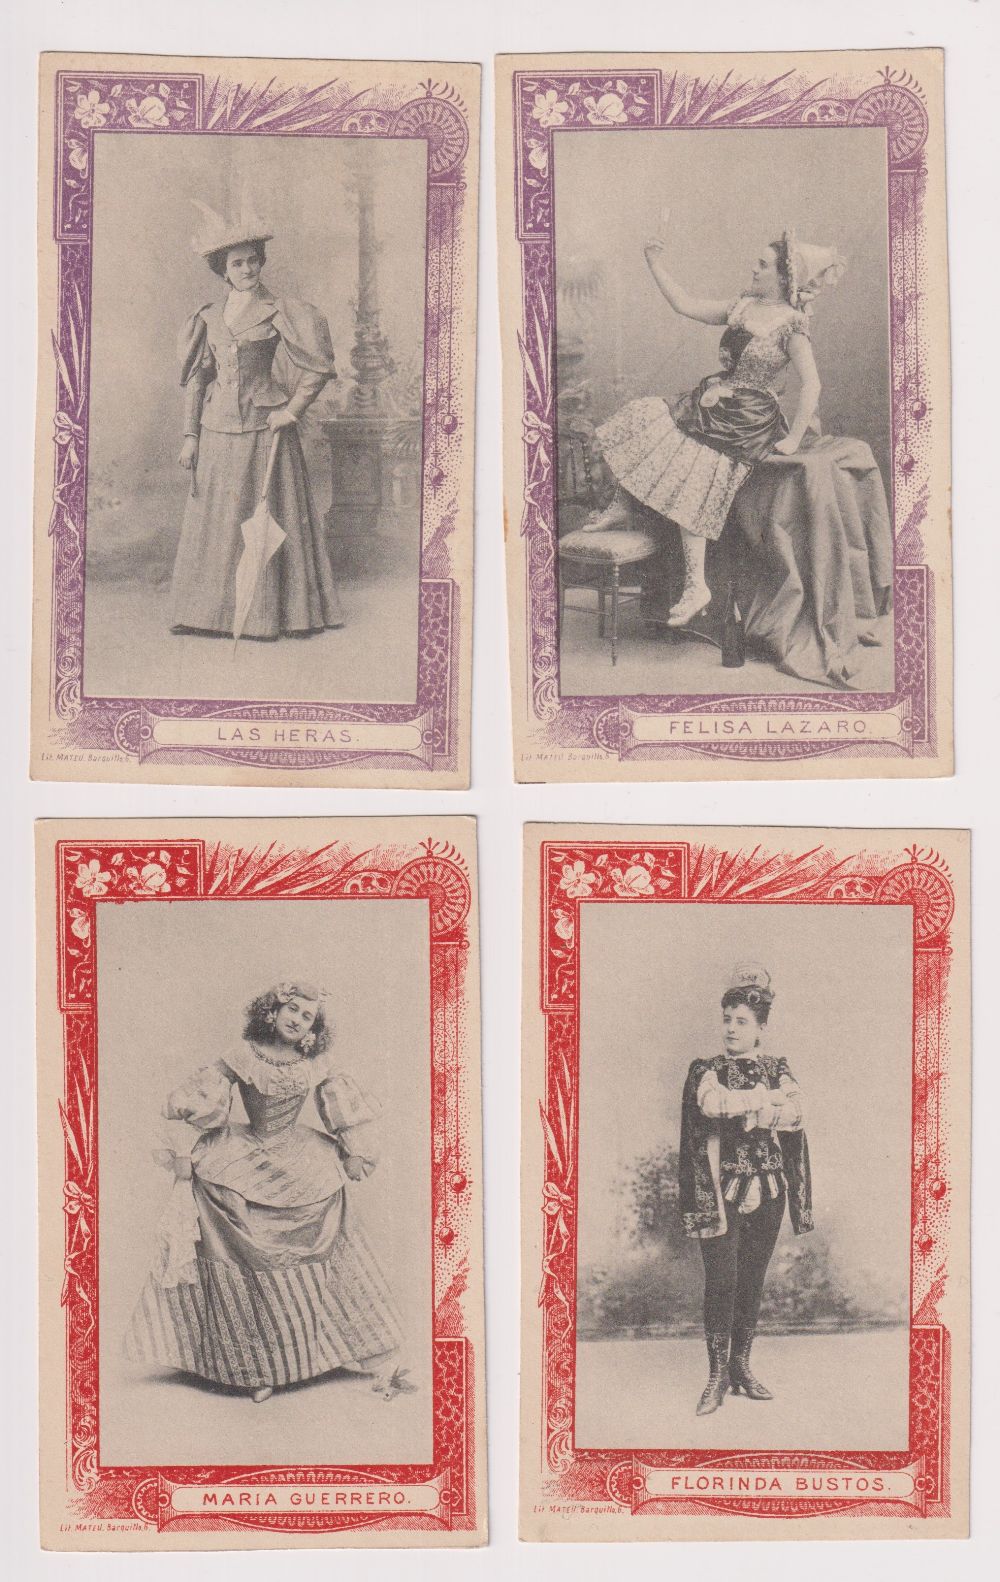 Trade cards, Spain, Anon, Actresses, 15 postcard size cards all showing early Actresses each with